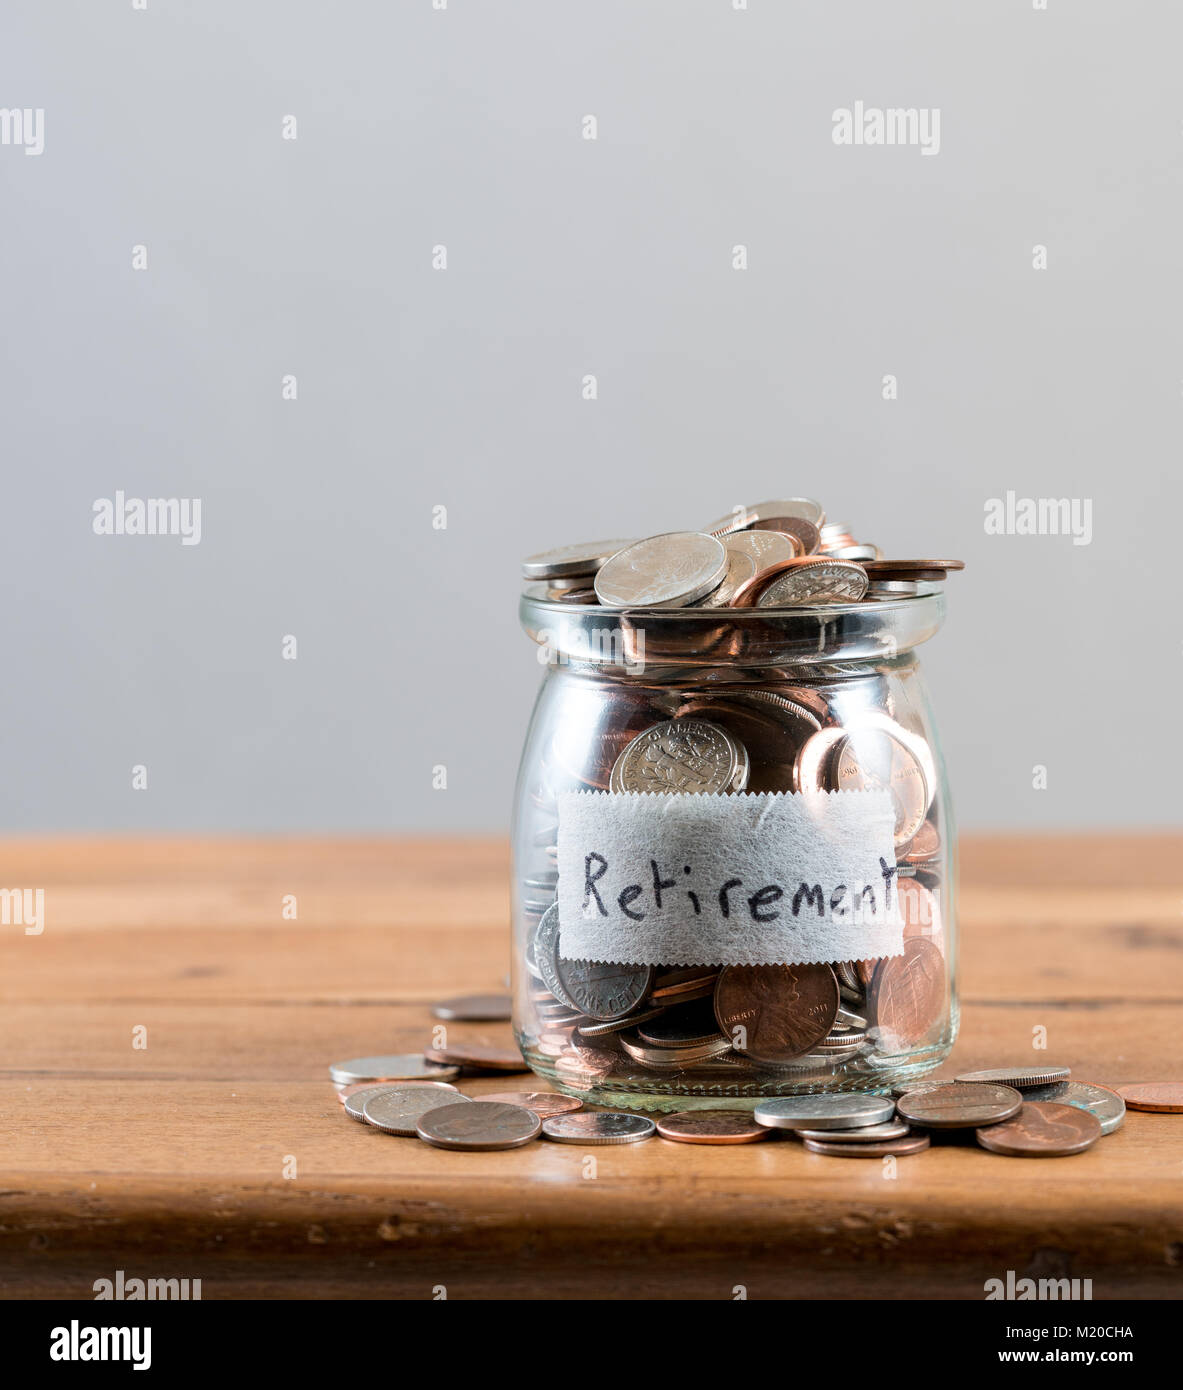 Concept image of wealth growing in retirement savings Stock Photo